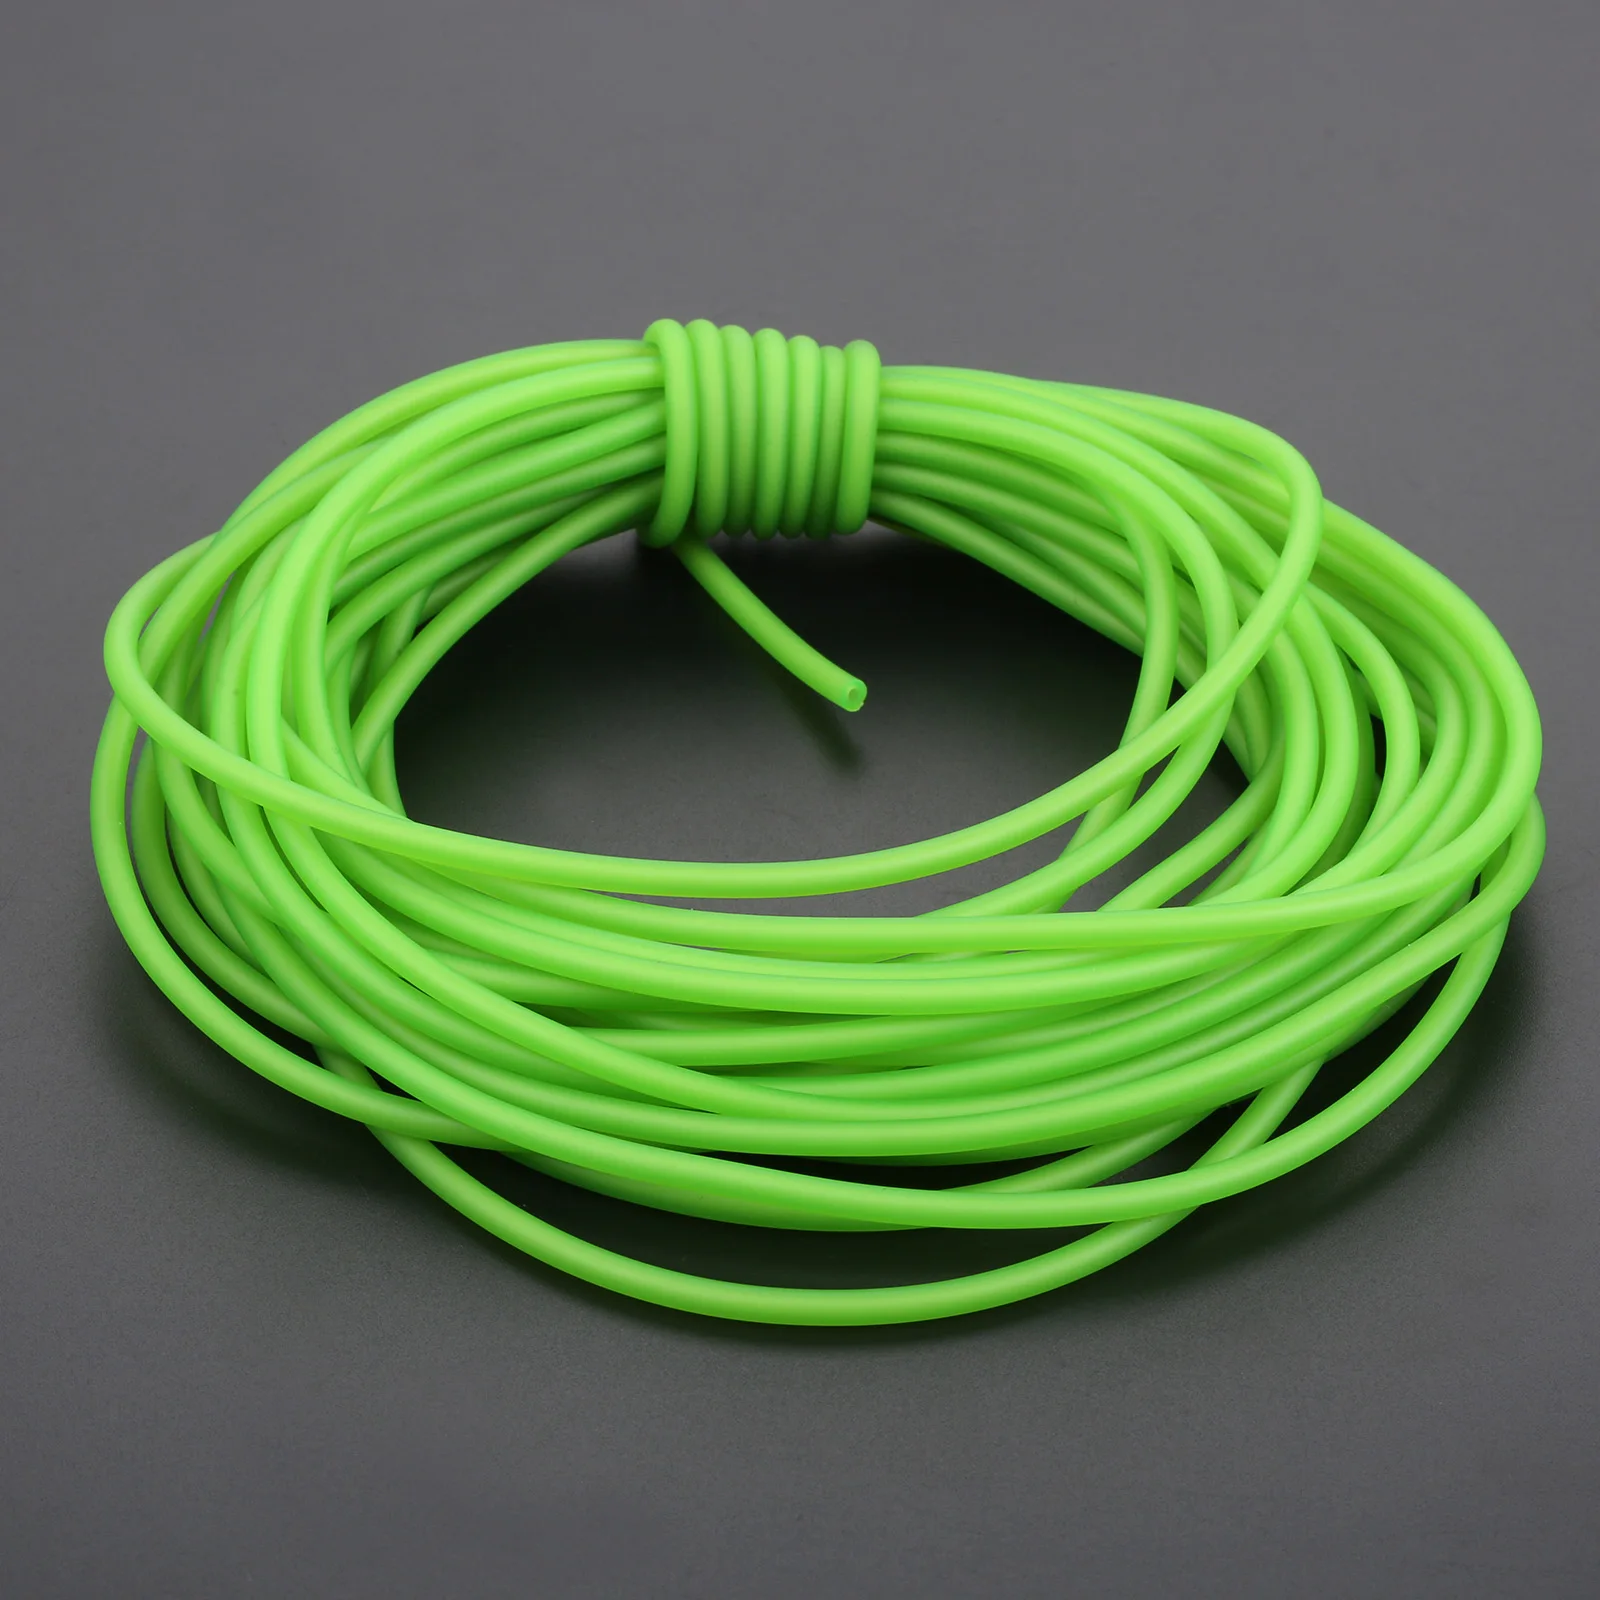 

SURIEEN Hunting 10M 1.6x3.6mm Strong Slingshot Natural Latex Tube Catapult Sling Shot Rubber Band Green Elastic Bungee Tube 1636